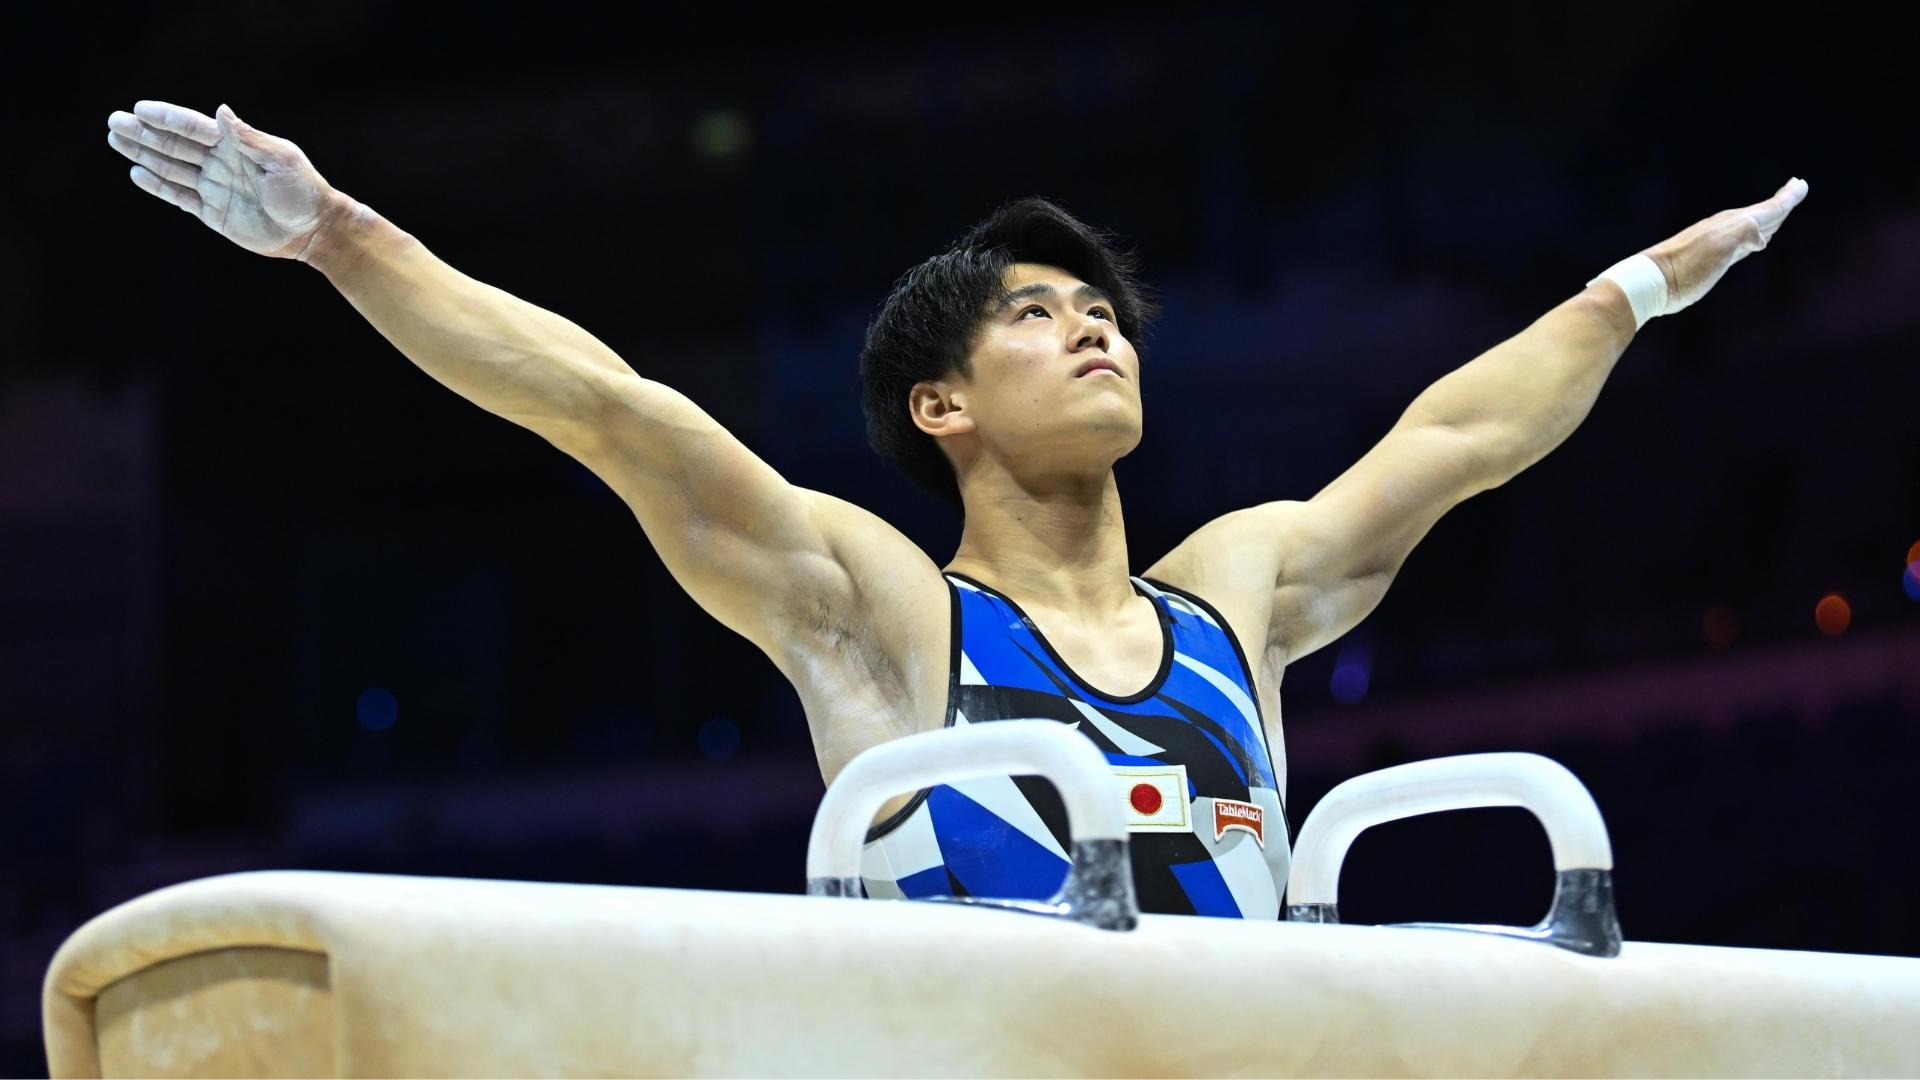 Reigning Olympic all-around champion Daiki Hashimoto (JPN) is a favorite to win the world all-around title on Friday night at the 2022 World Gymnastics Championships.